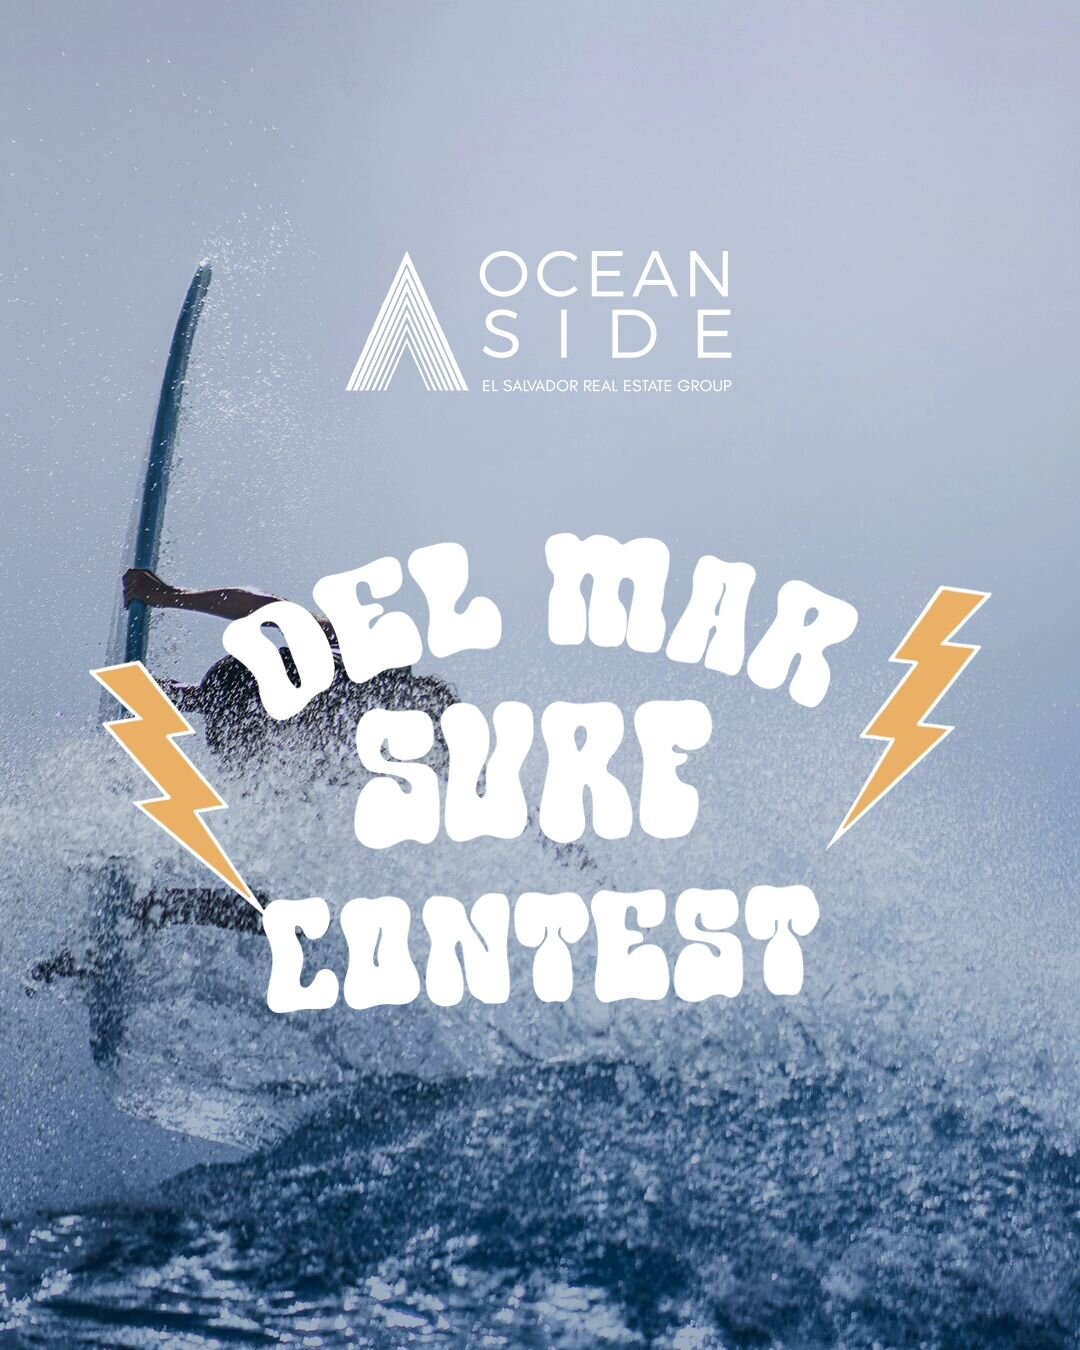 Inspired by the legends and stars of Salvadoran #surfing, Oceanside proudly backs and boosts local surf showdowns along the stunning shores of #ElSalvador. So, let's rewind and reignite the stoke from the legendary Del Mar Surf Contest! 🏄&zwj;♂️🌊

